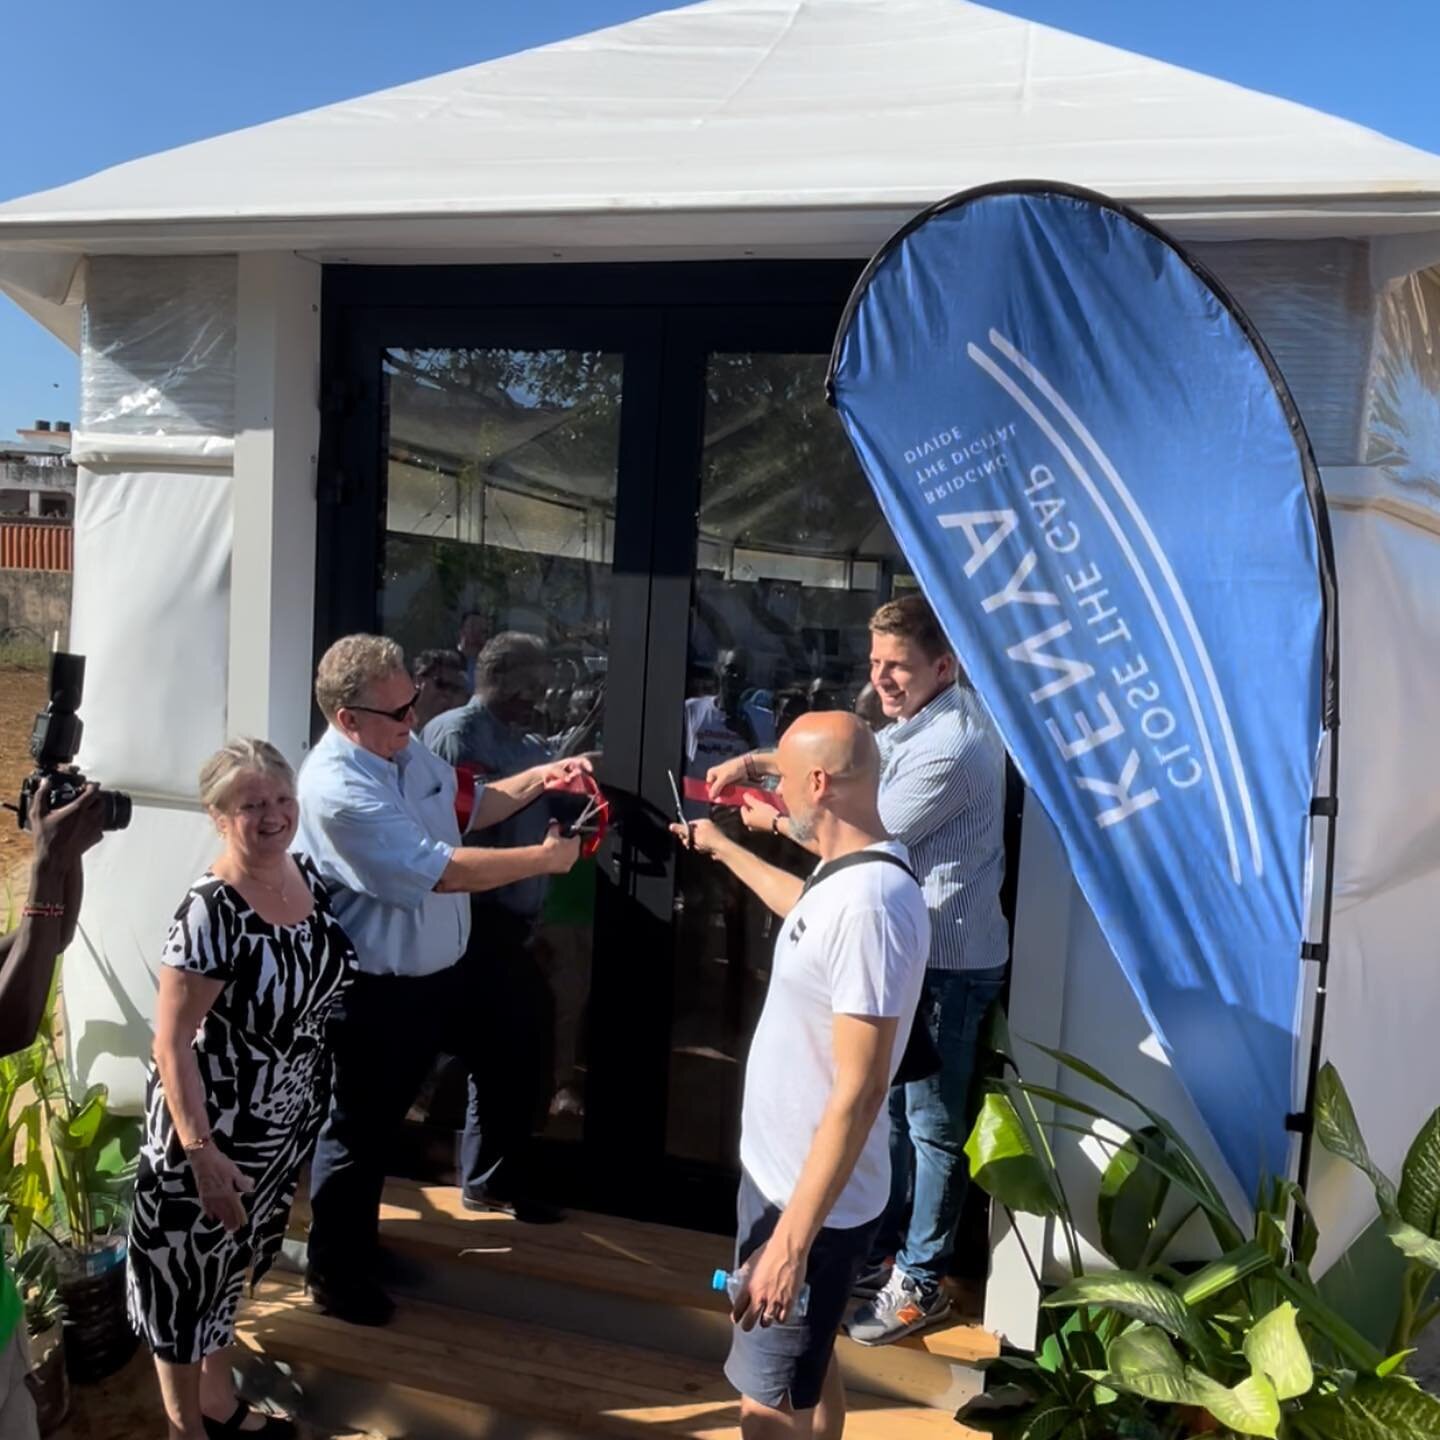 Maggie goes to Mombasa - official opening - Monday the Maggie was officially inaugurated by our Belgian ambassador Peter Maddens and professor Marleen Temmerman during the start of the Pwani innovation week 2022 in Mombasa. A lot of interesting start